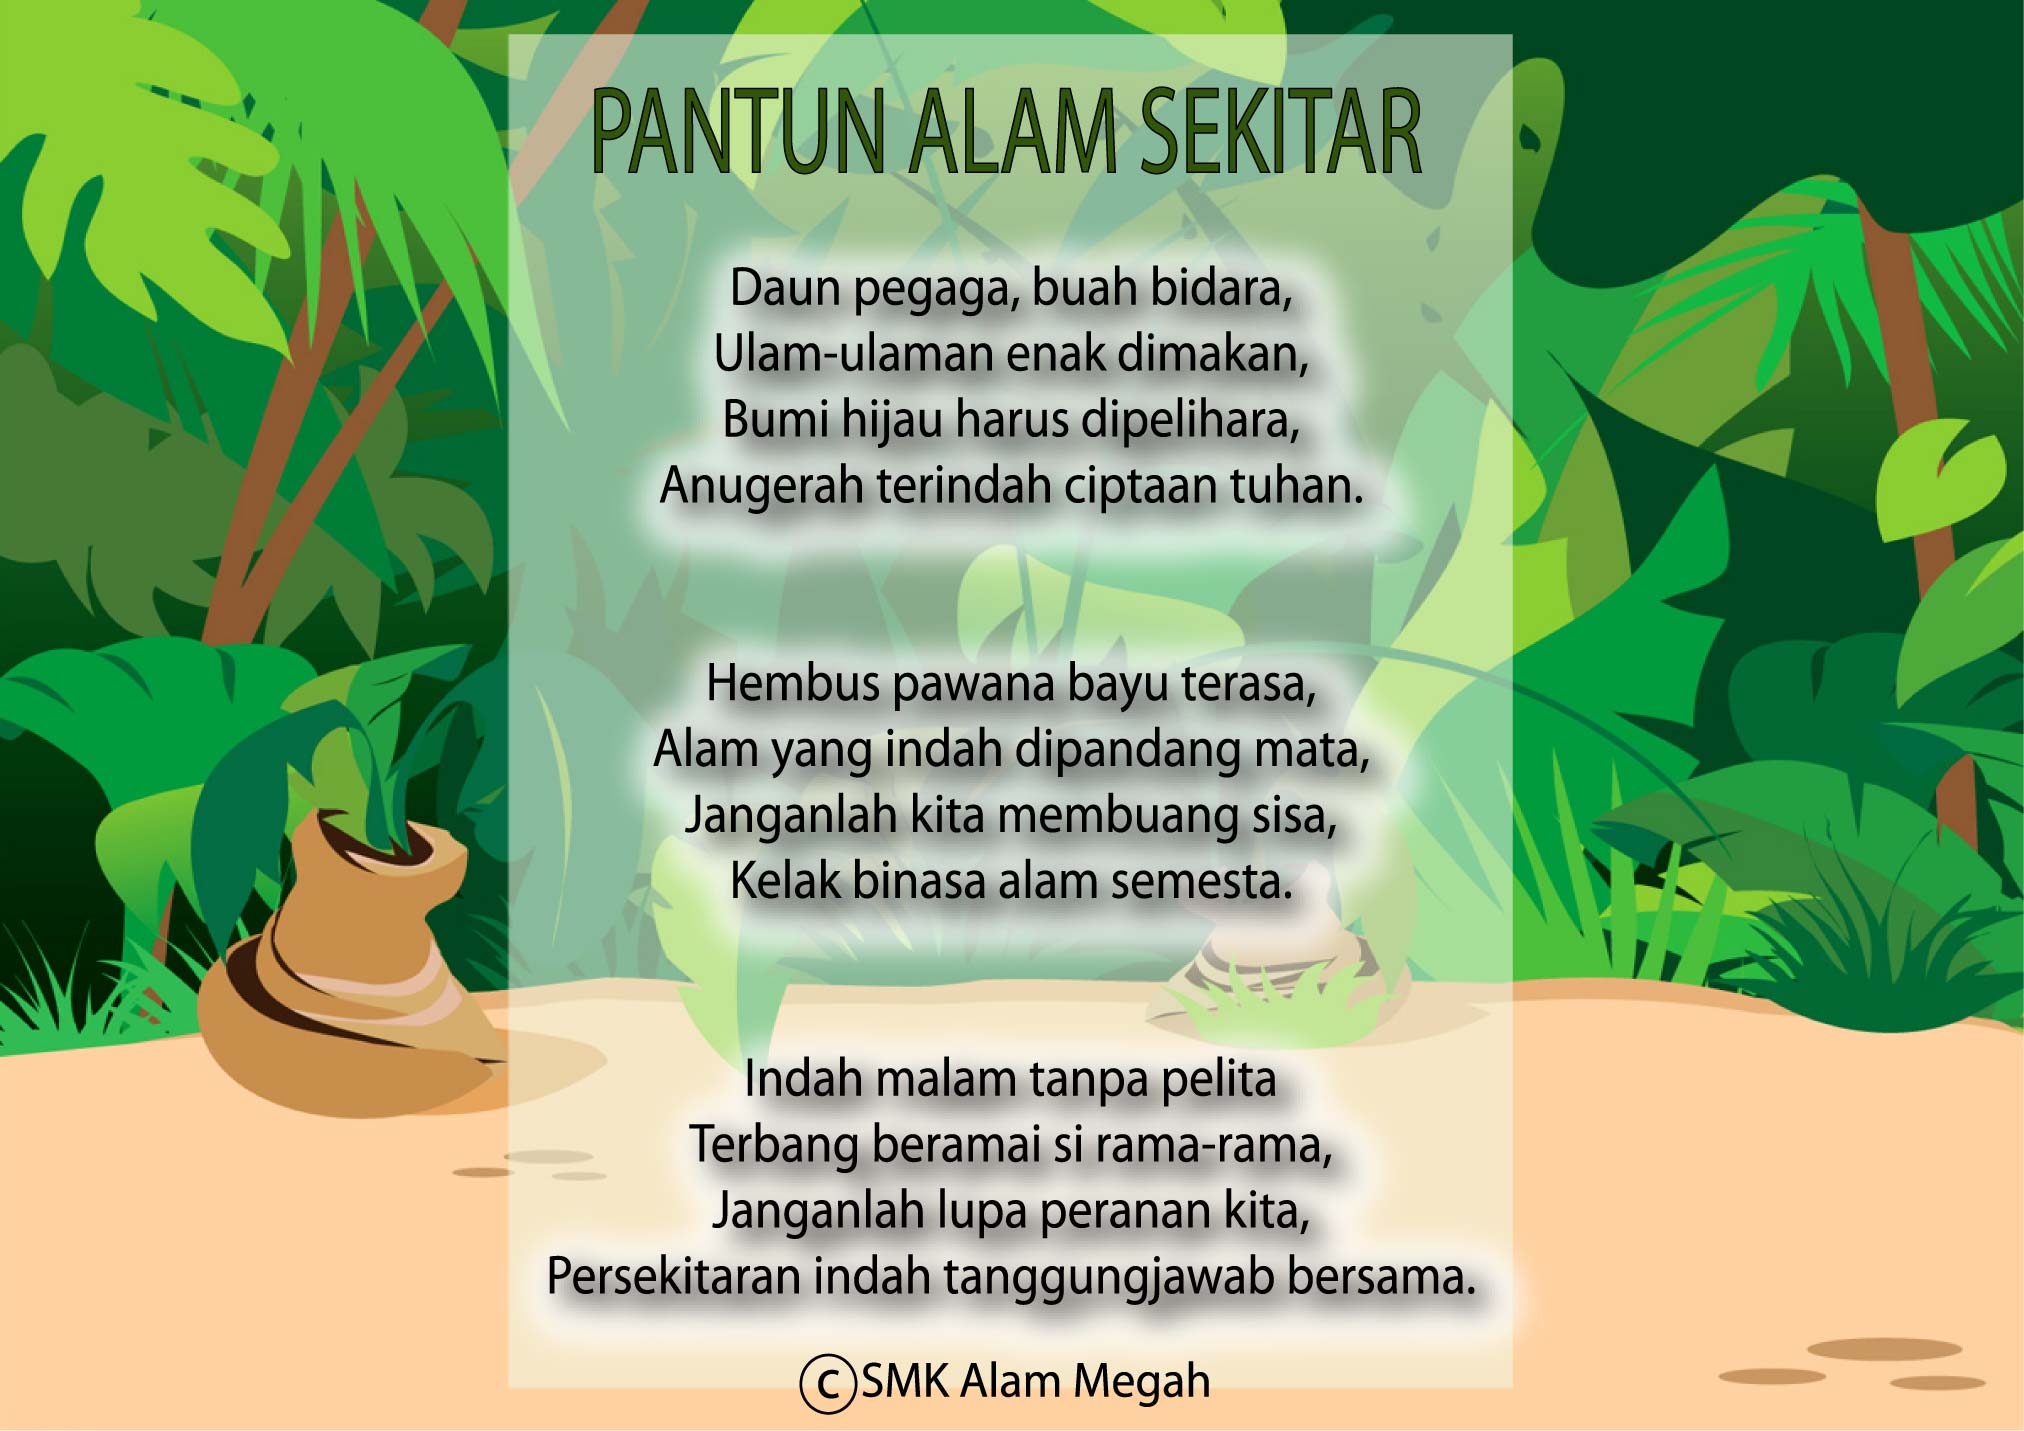 Pantun Indonesia  Share The Knownledge